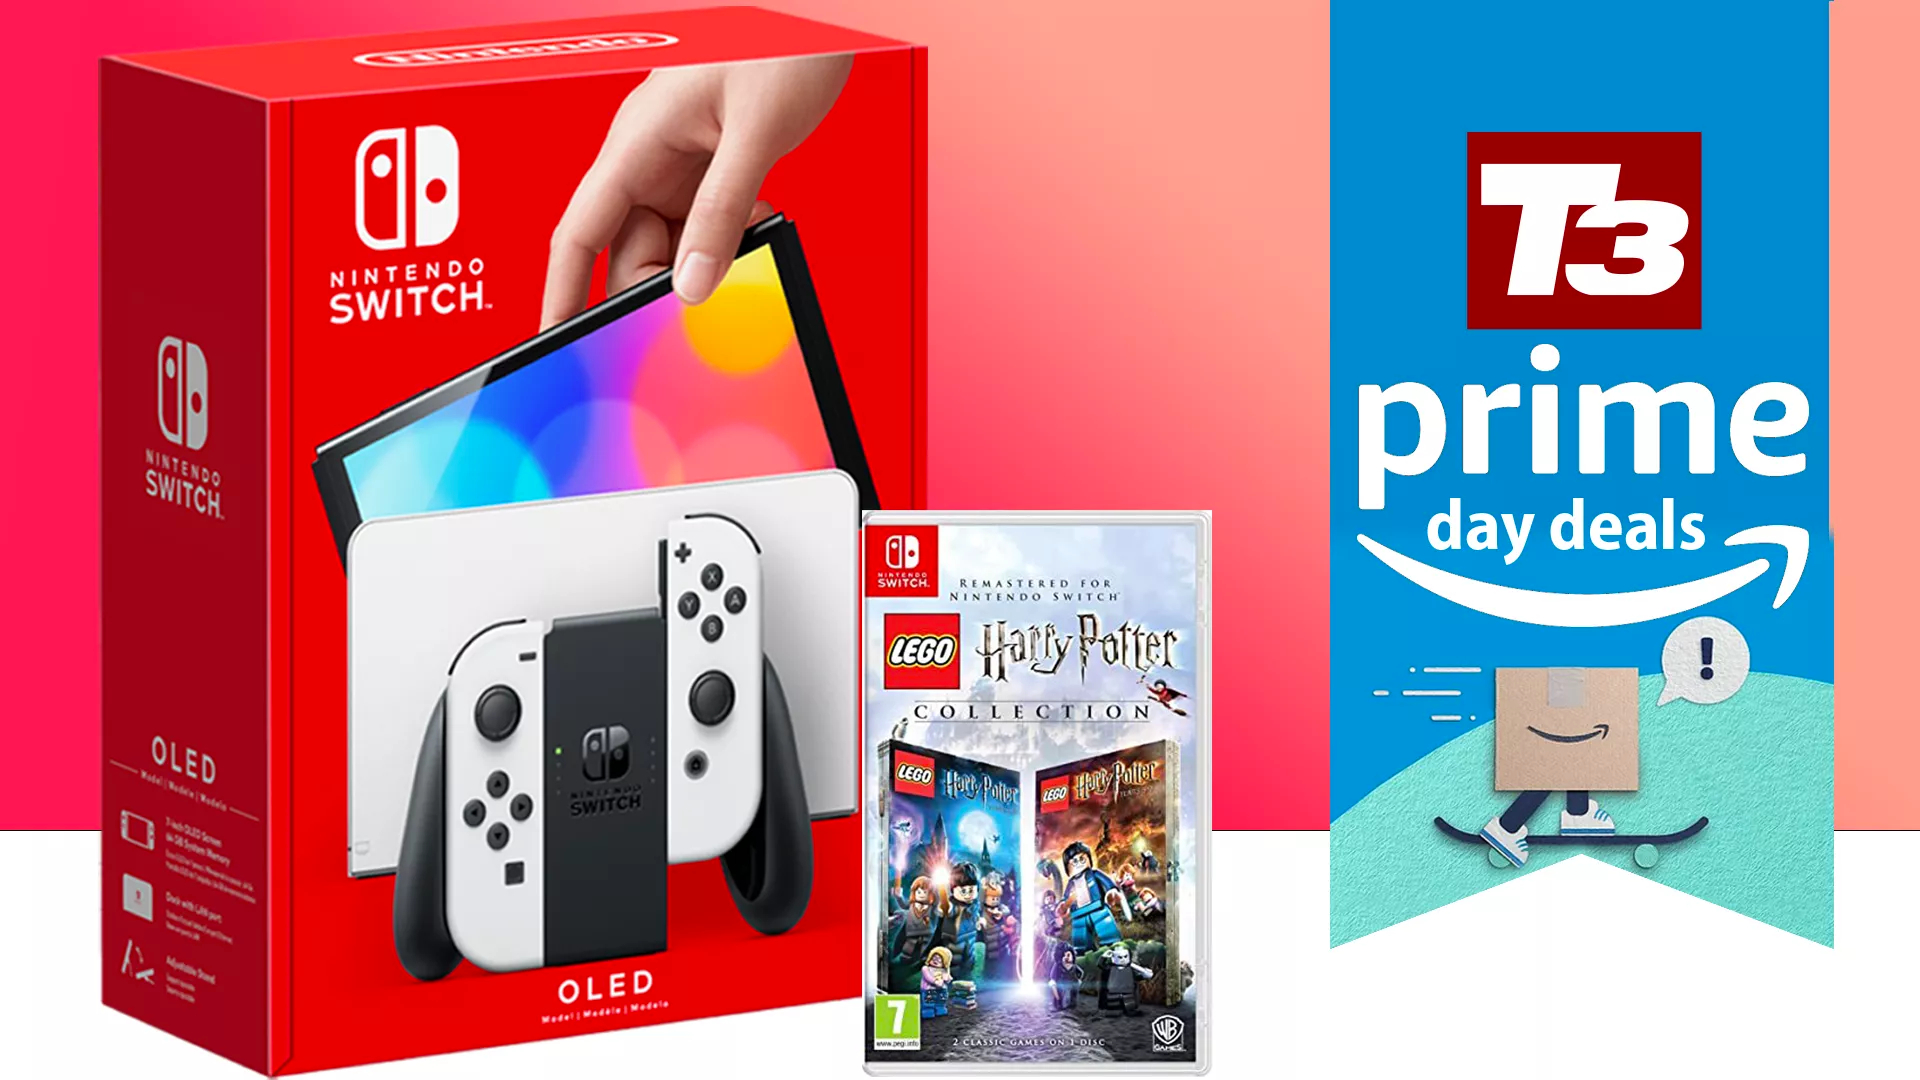 Switch OLED Lego Harry Potter Amazon Prime Day deal